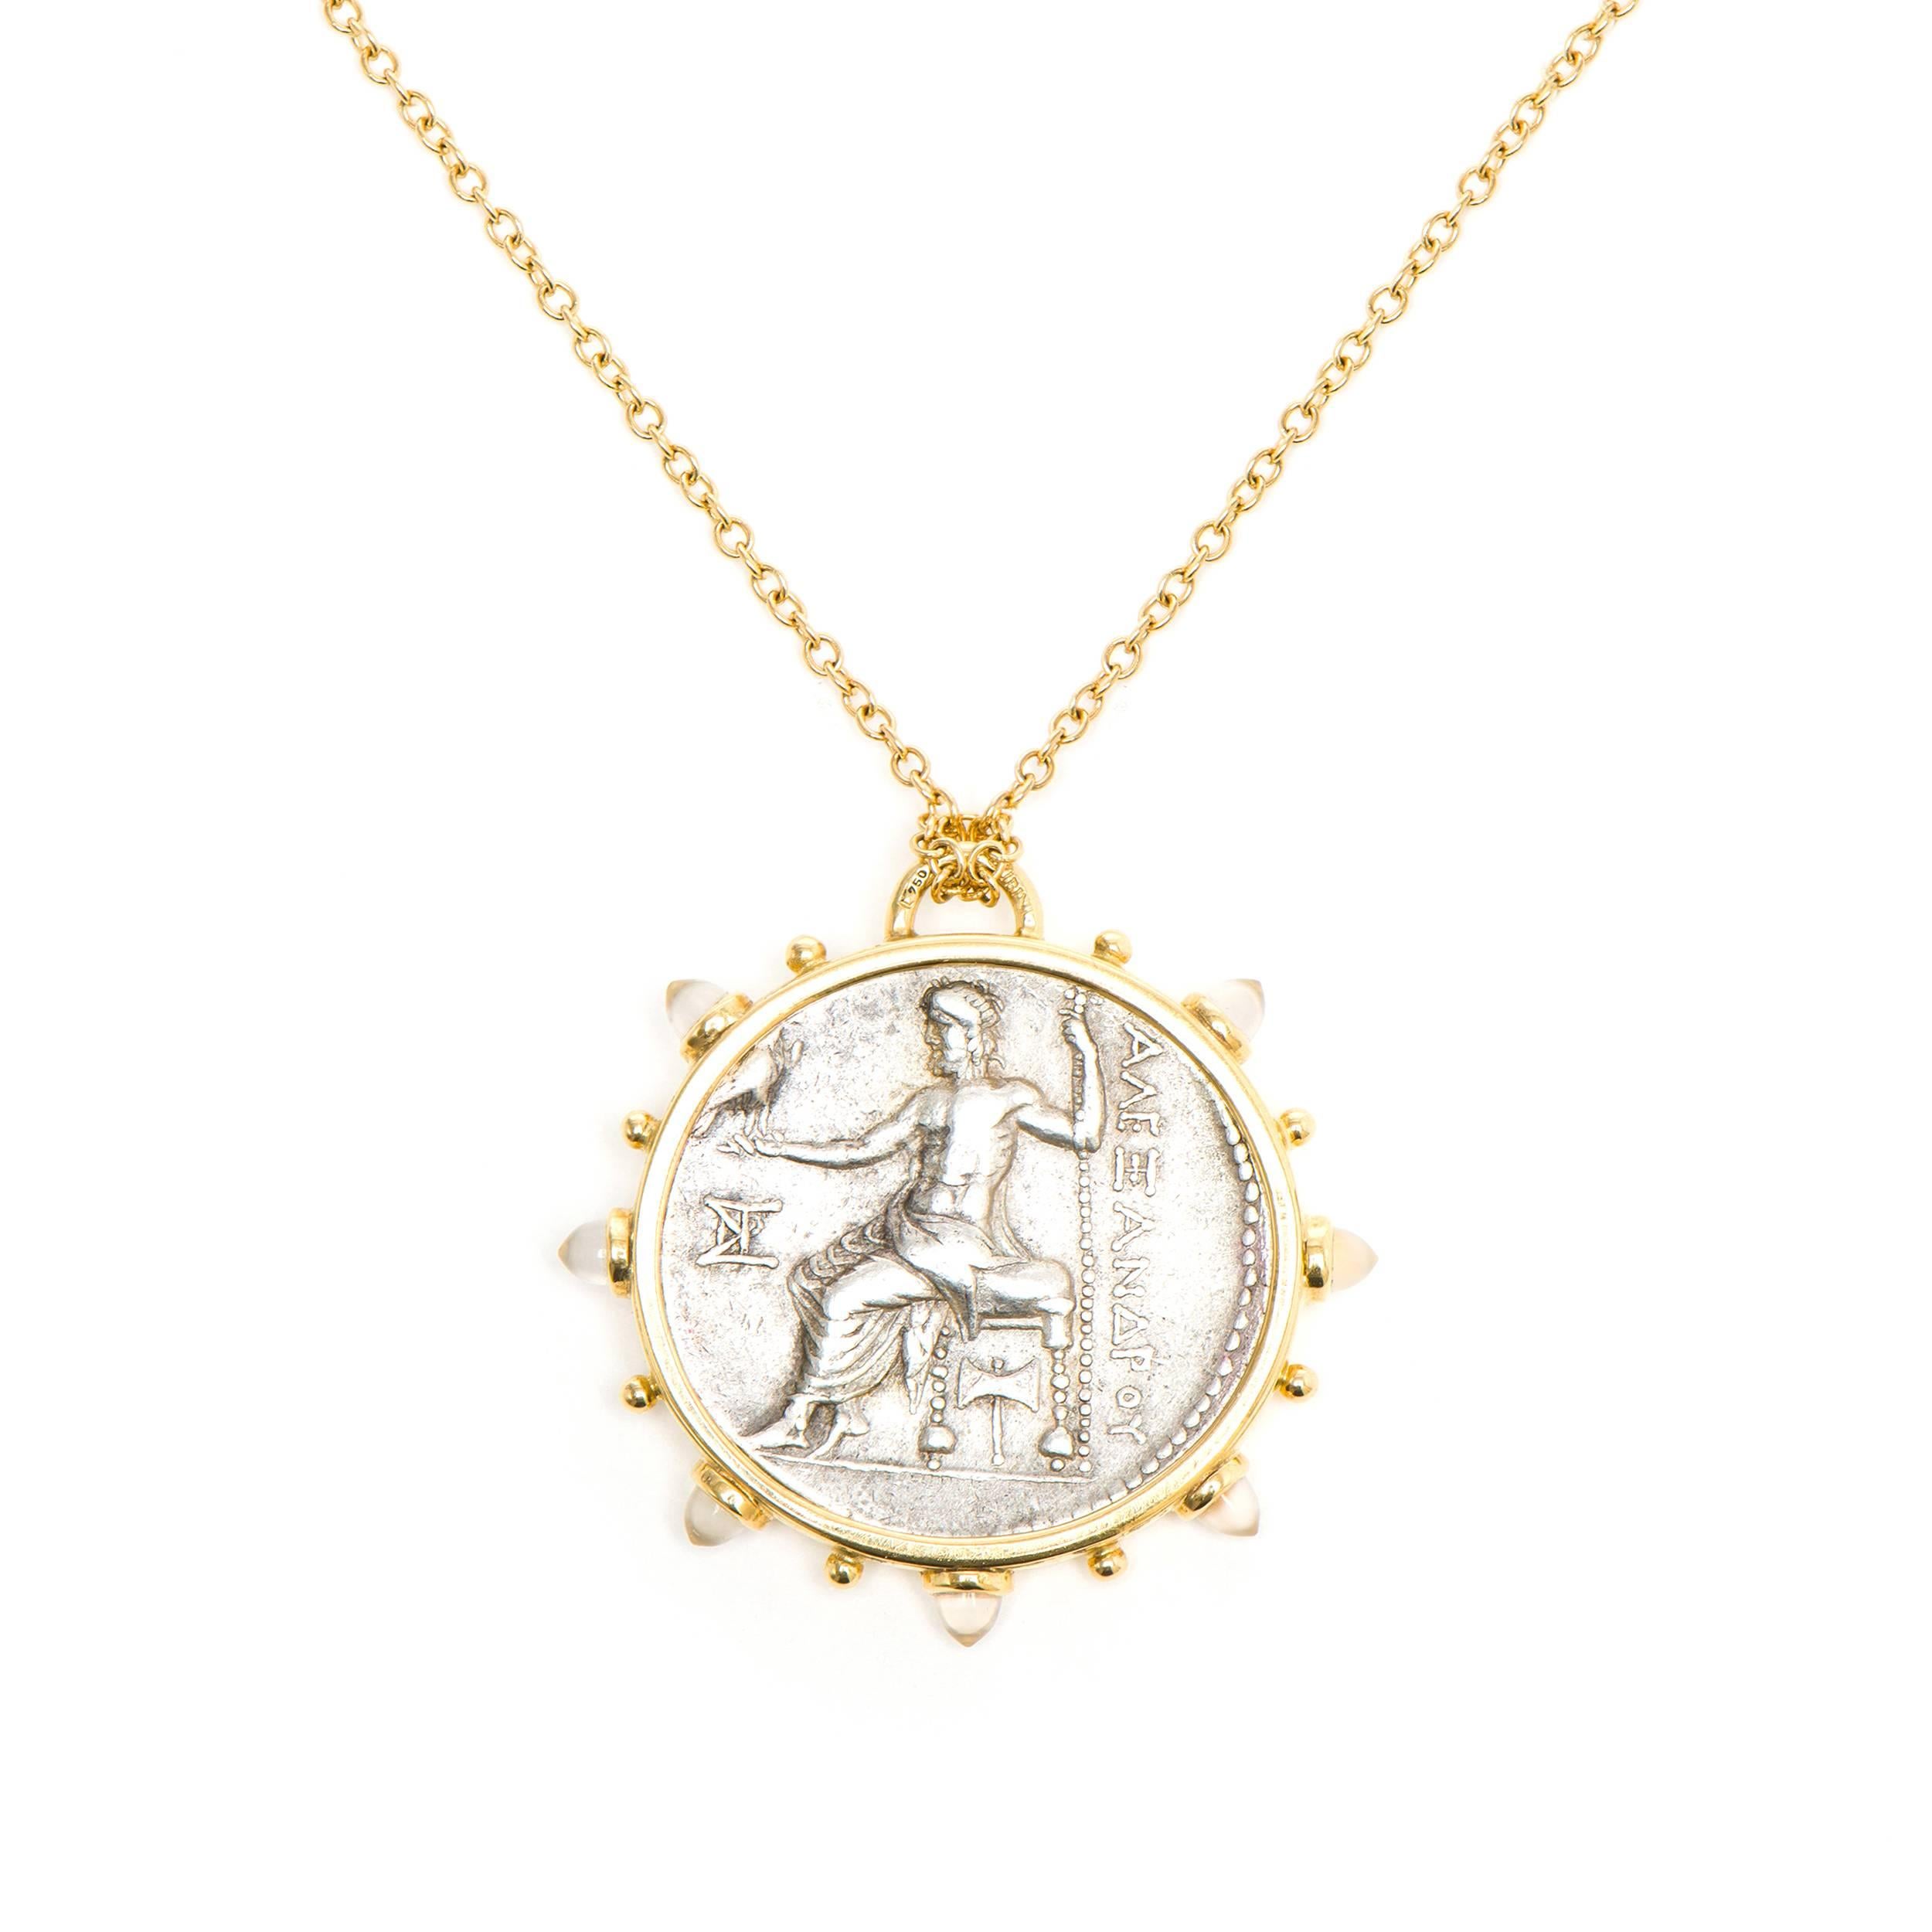 This DUBINI coin necklace from the 'Empires' collection features an authentic Macedon coin from 336-323 B.C set in 18K yellow gold with bullet moonstone cabochons. 

Depicted on the coin: Alexander with a bust of Heracles on the obverse and a seated